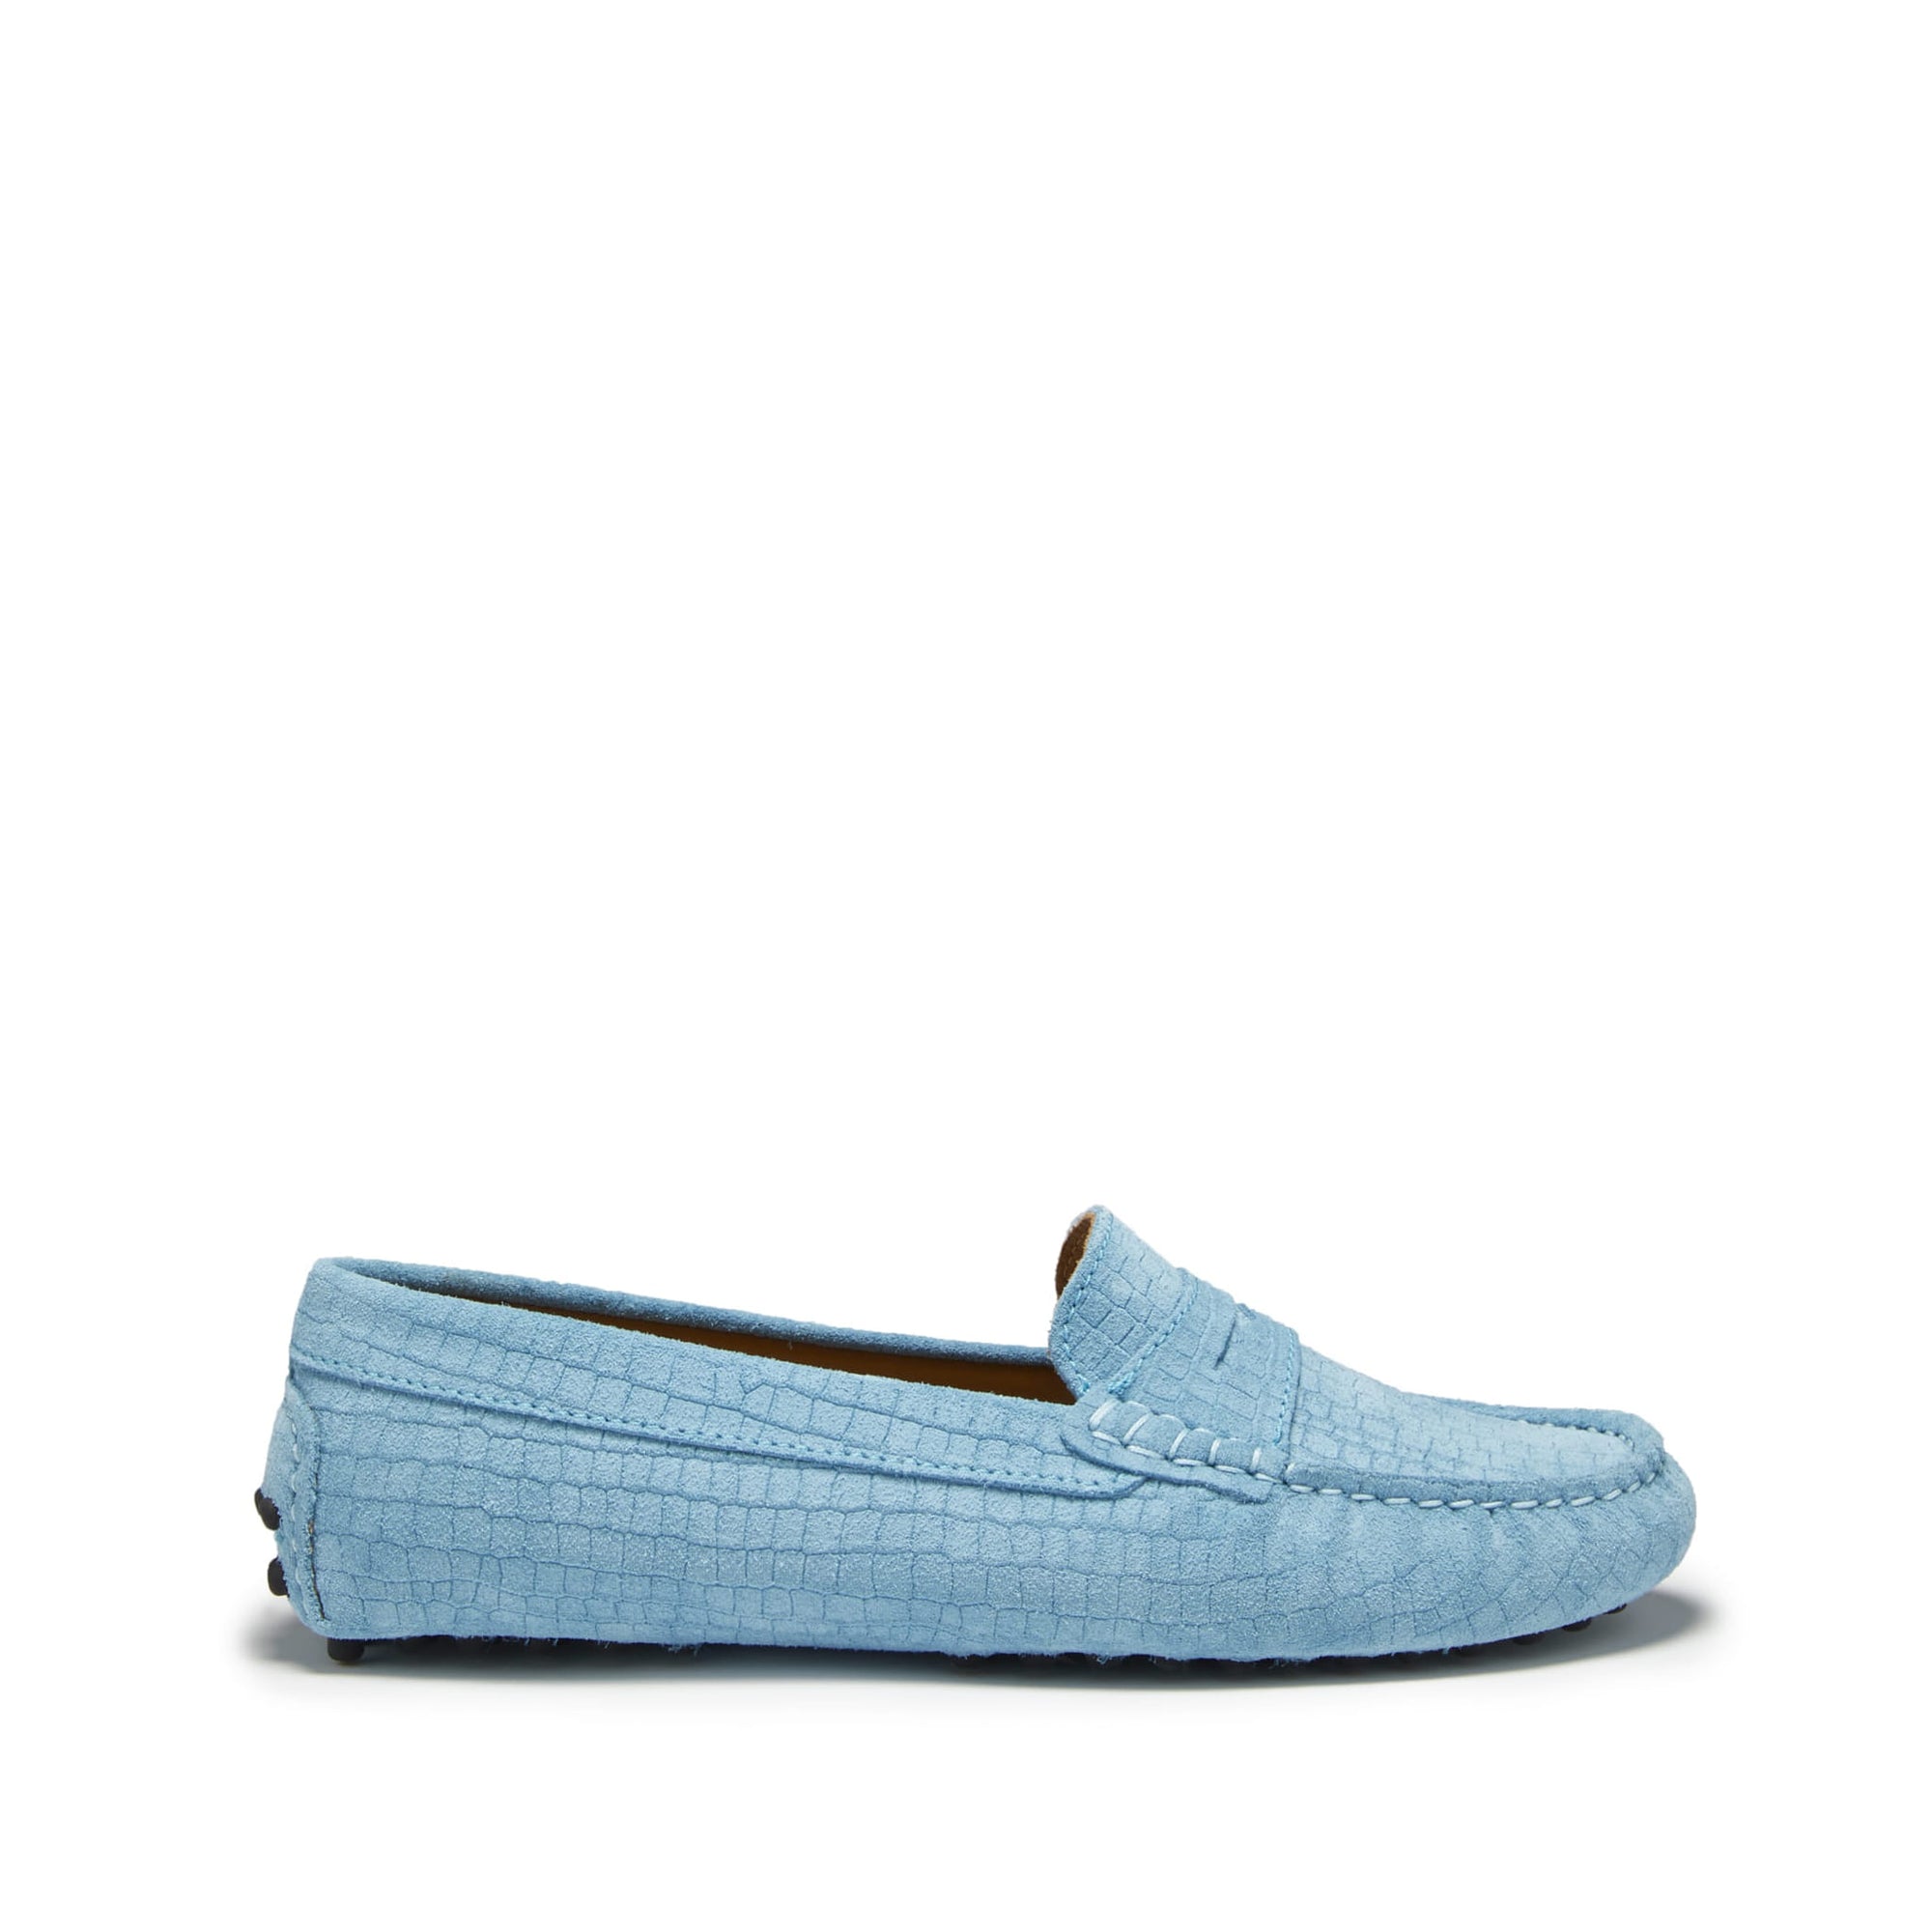 Penny Driving Loafers, petrol blue suede - Hugs & Co.